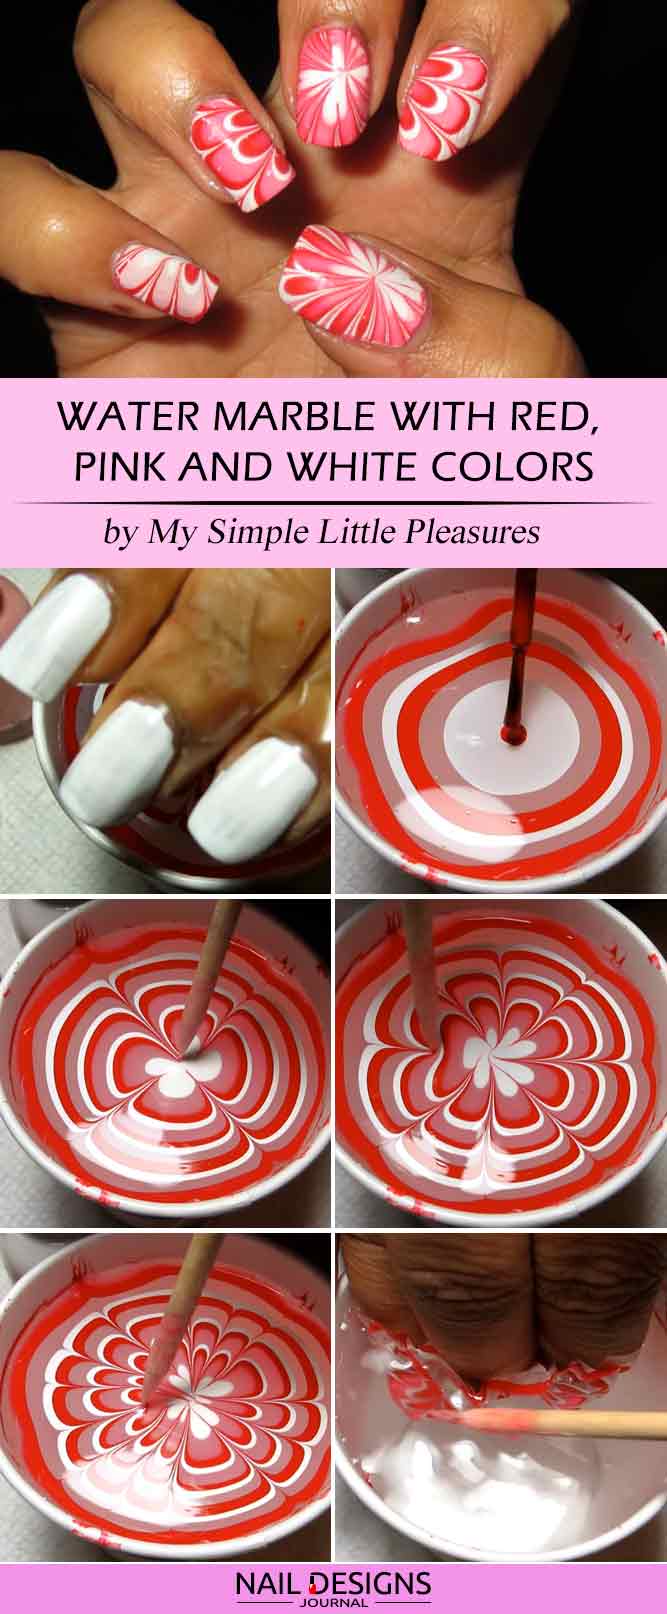 Water Marble With Red Pink and White Colors